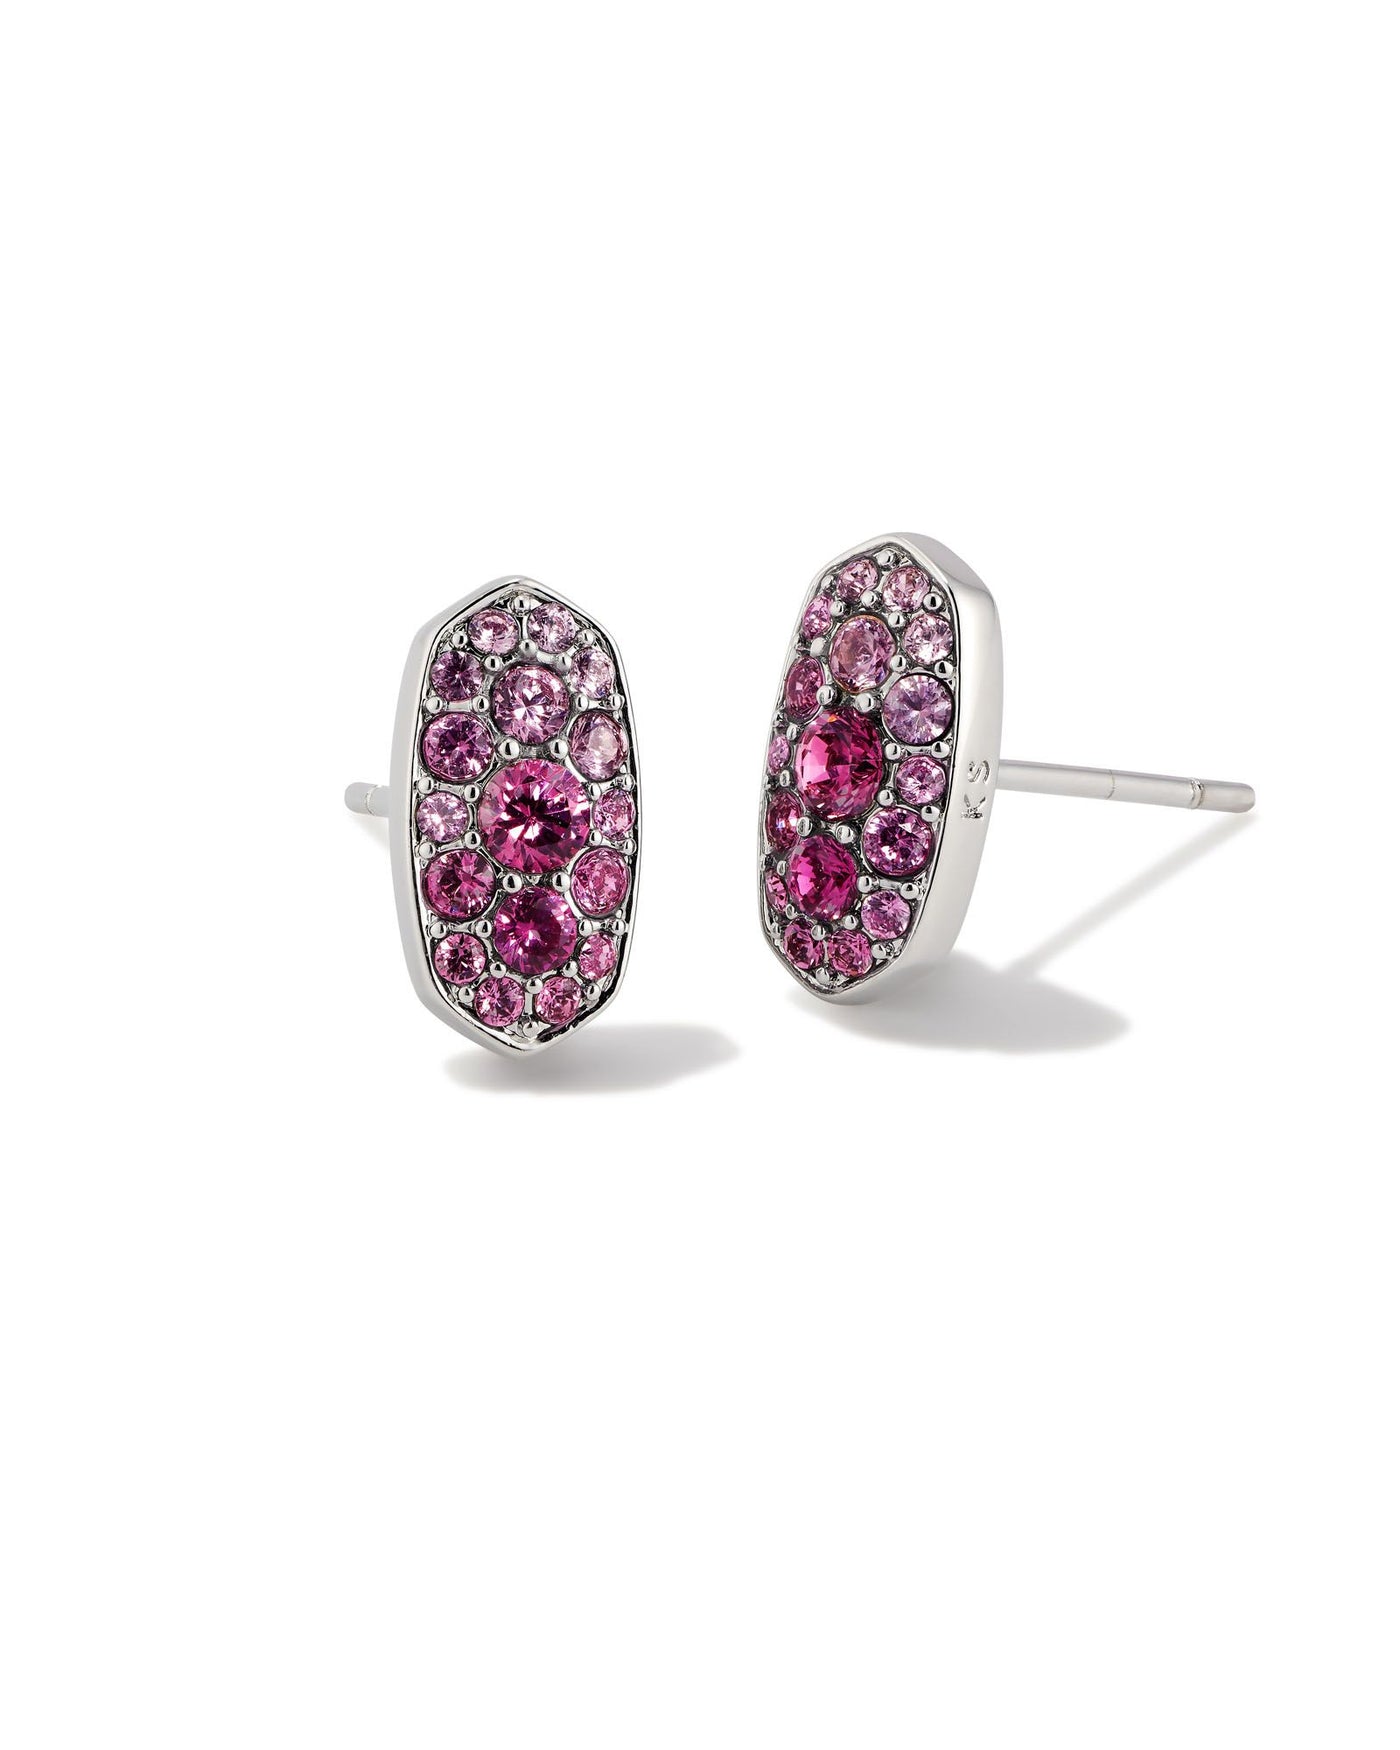 Kendra Scott Grayson Crystal Stud Earrings in Pink Ombre-Earrings-Kendra Scott-Market Street Nest, Fashionable Clothing, Shoes and Home Décor Located in Mabank, TX